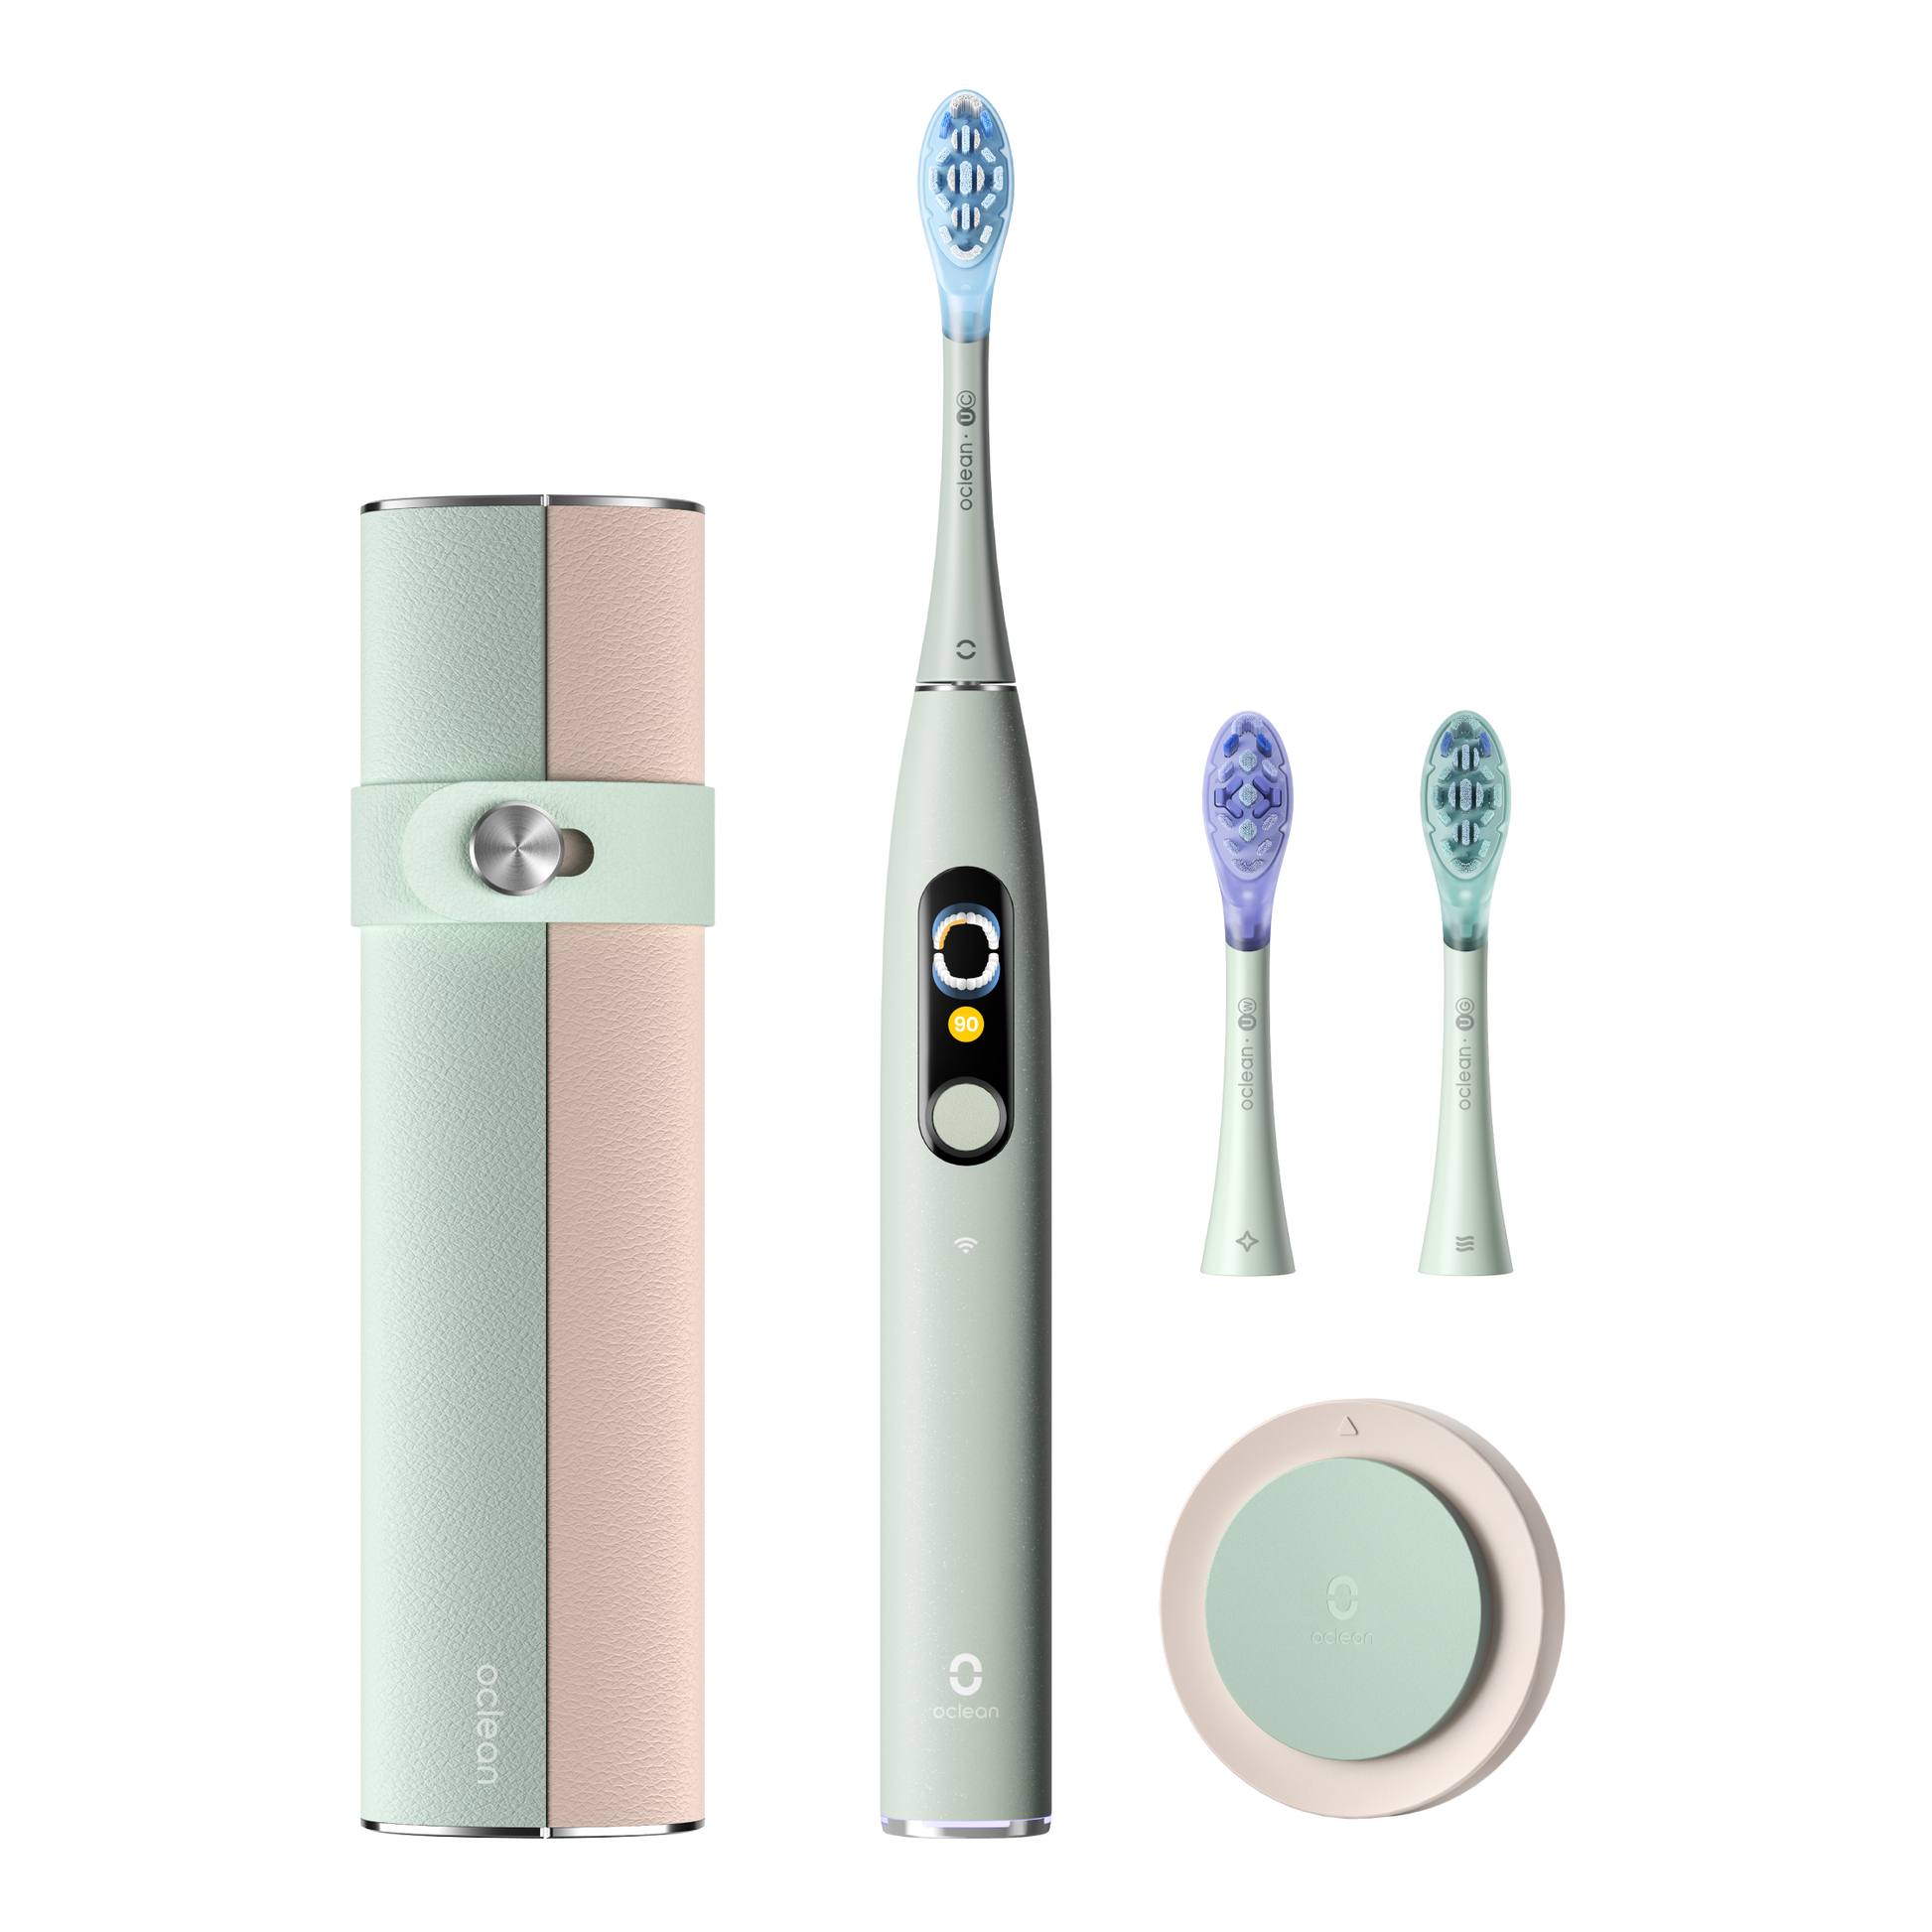 Oclean X Ultra S-Toothbrushes-Oclean US Store